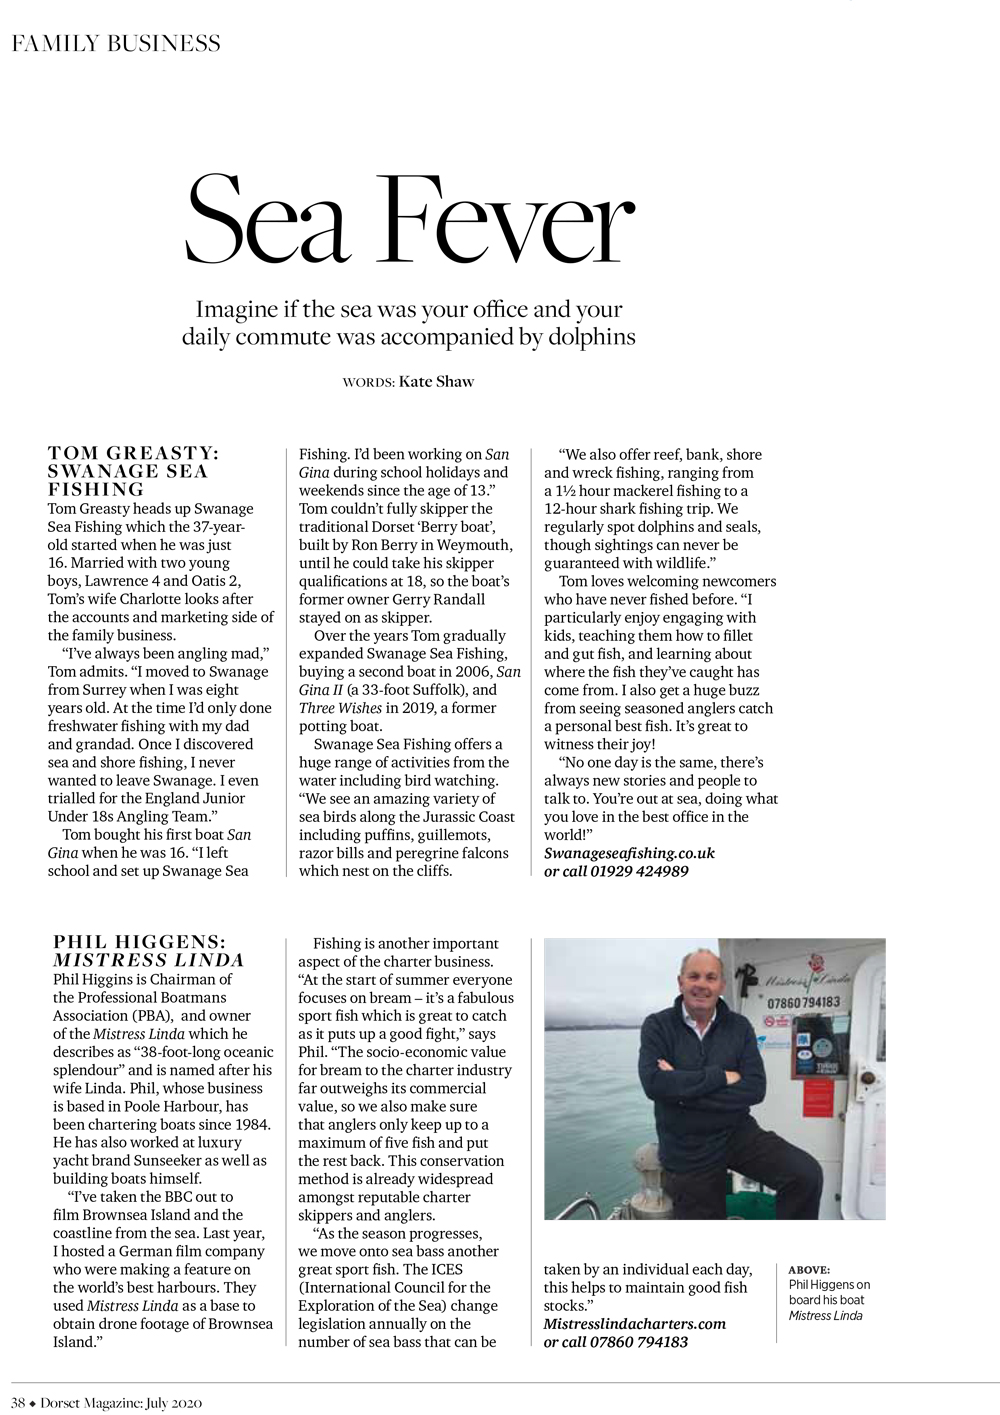 SEA FEVER – Imagine if the sea was your office and your daily commute was accompanied by dolphins!  (Dorset Magazine – July edition 2020)